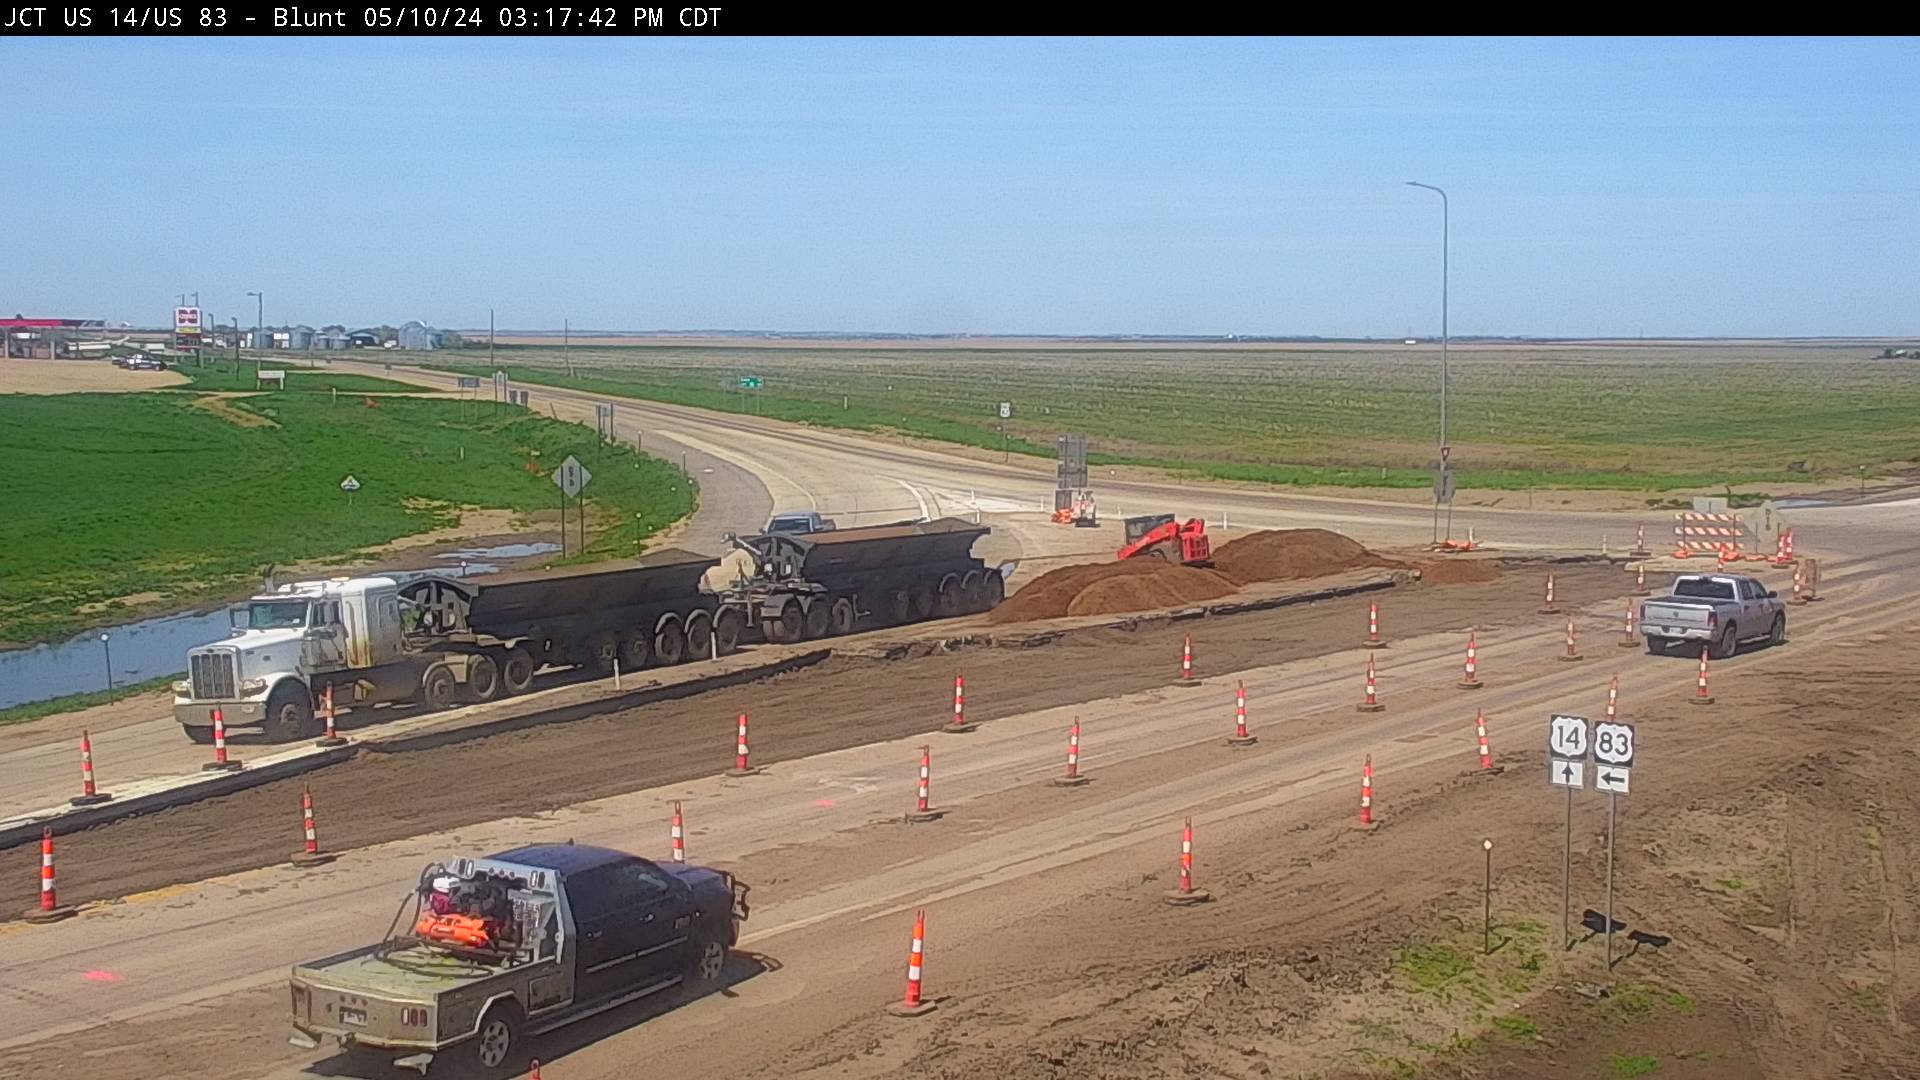 Traffic Cam 4 miles west of town at US-14 & US-83 - North Player